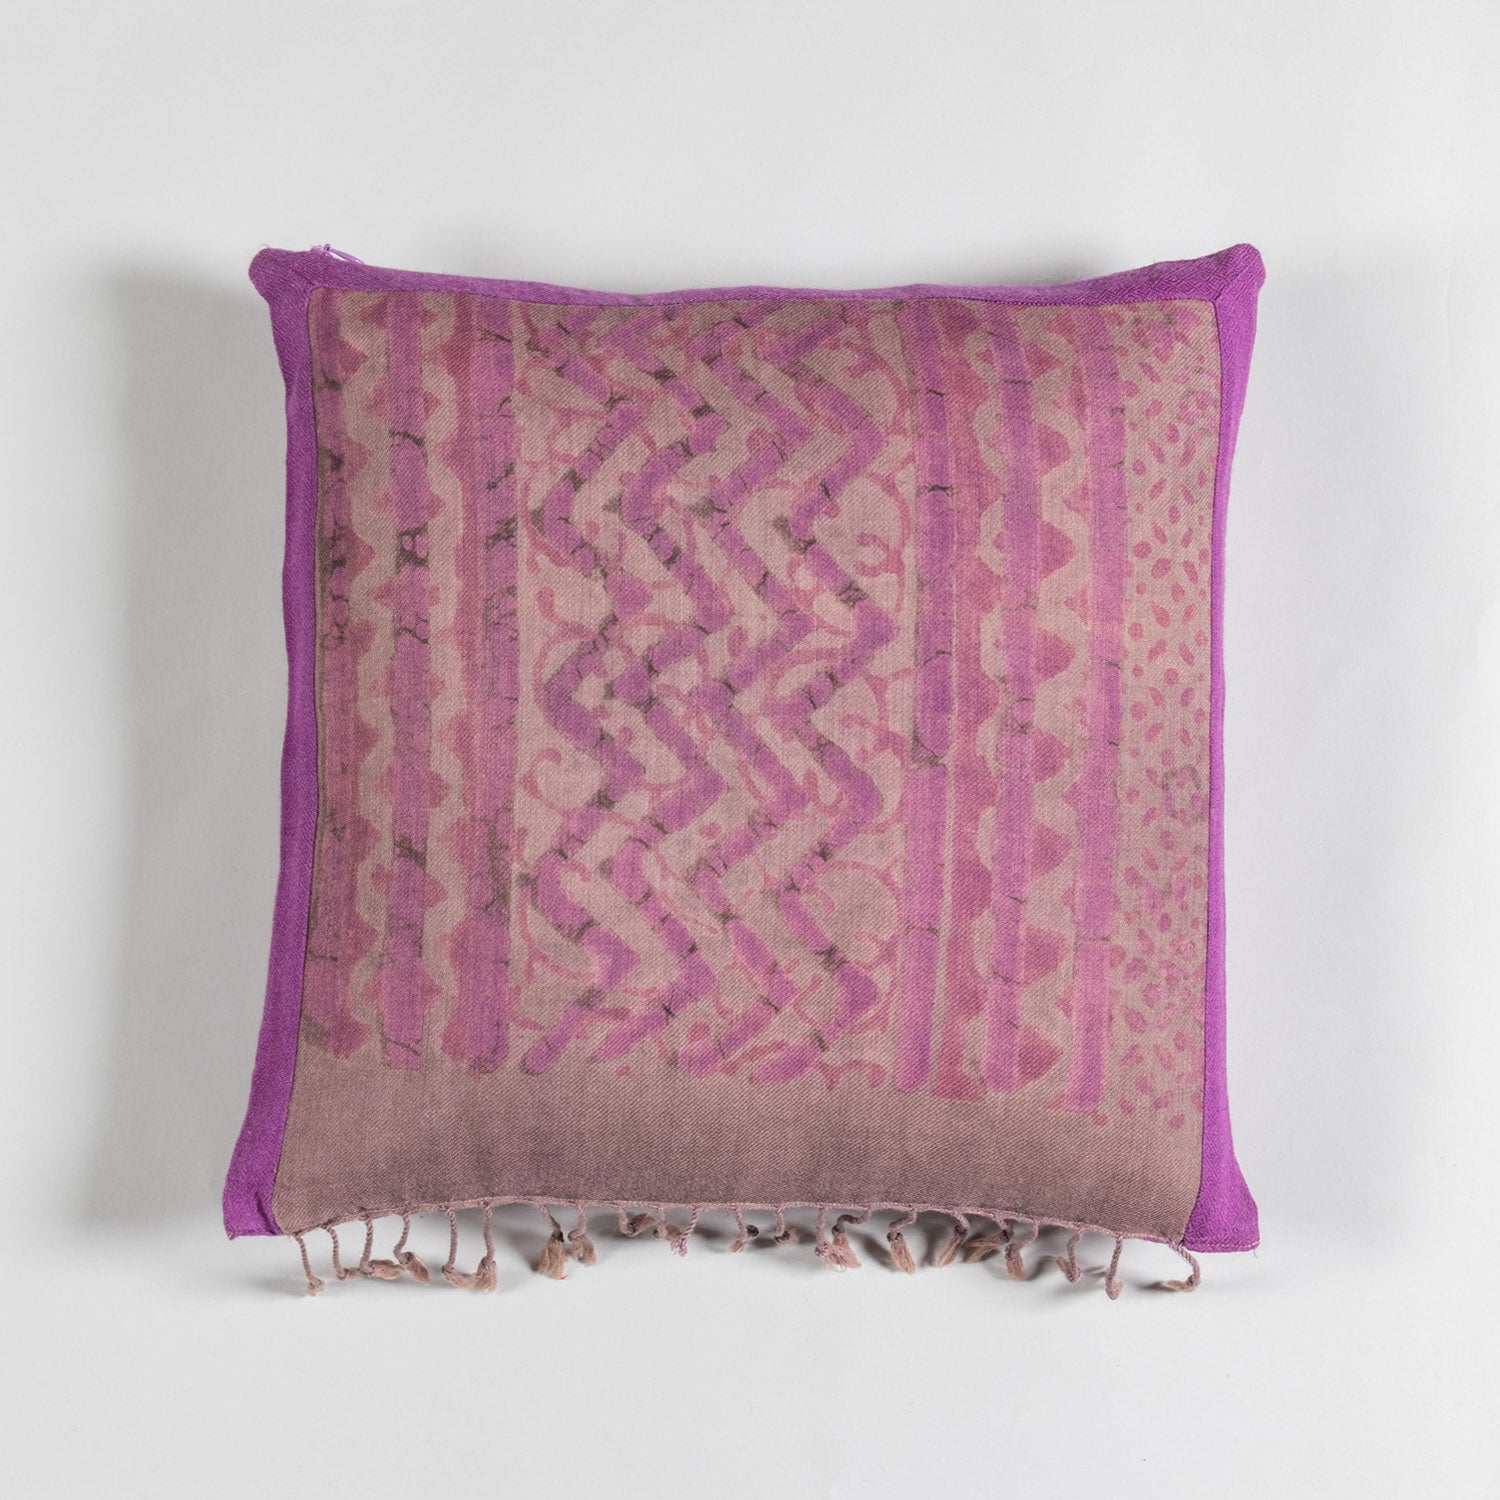 Handwoven Upcycled Purple & Lilac Wool Cushion Cover - 16x16